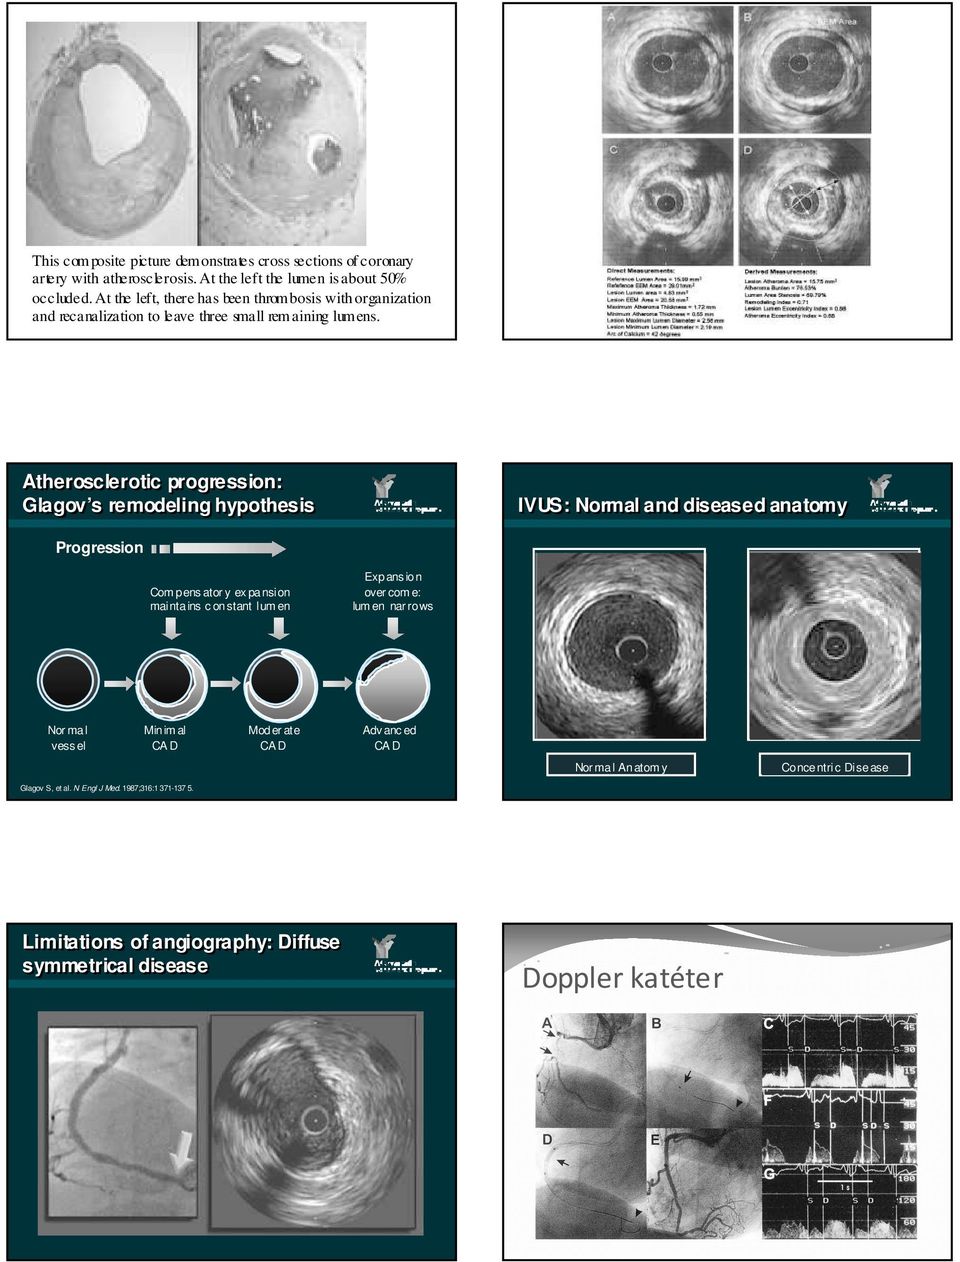 Atherosclerotic progression: Glagov s remodeling hypothesis Progression Com pens ator y ex pansion maintains c onstant lum en Expans ion over com e: lum en nar rows IVUS: Normal and